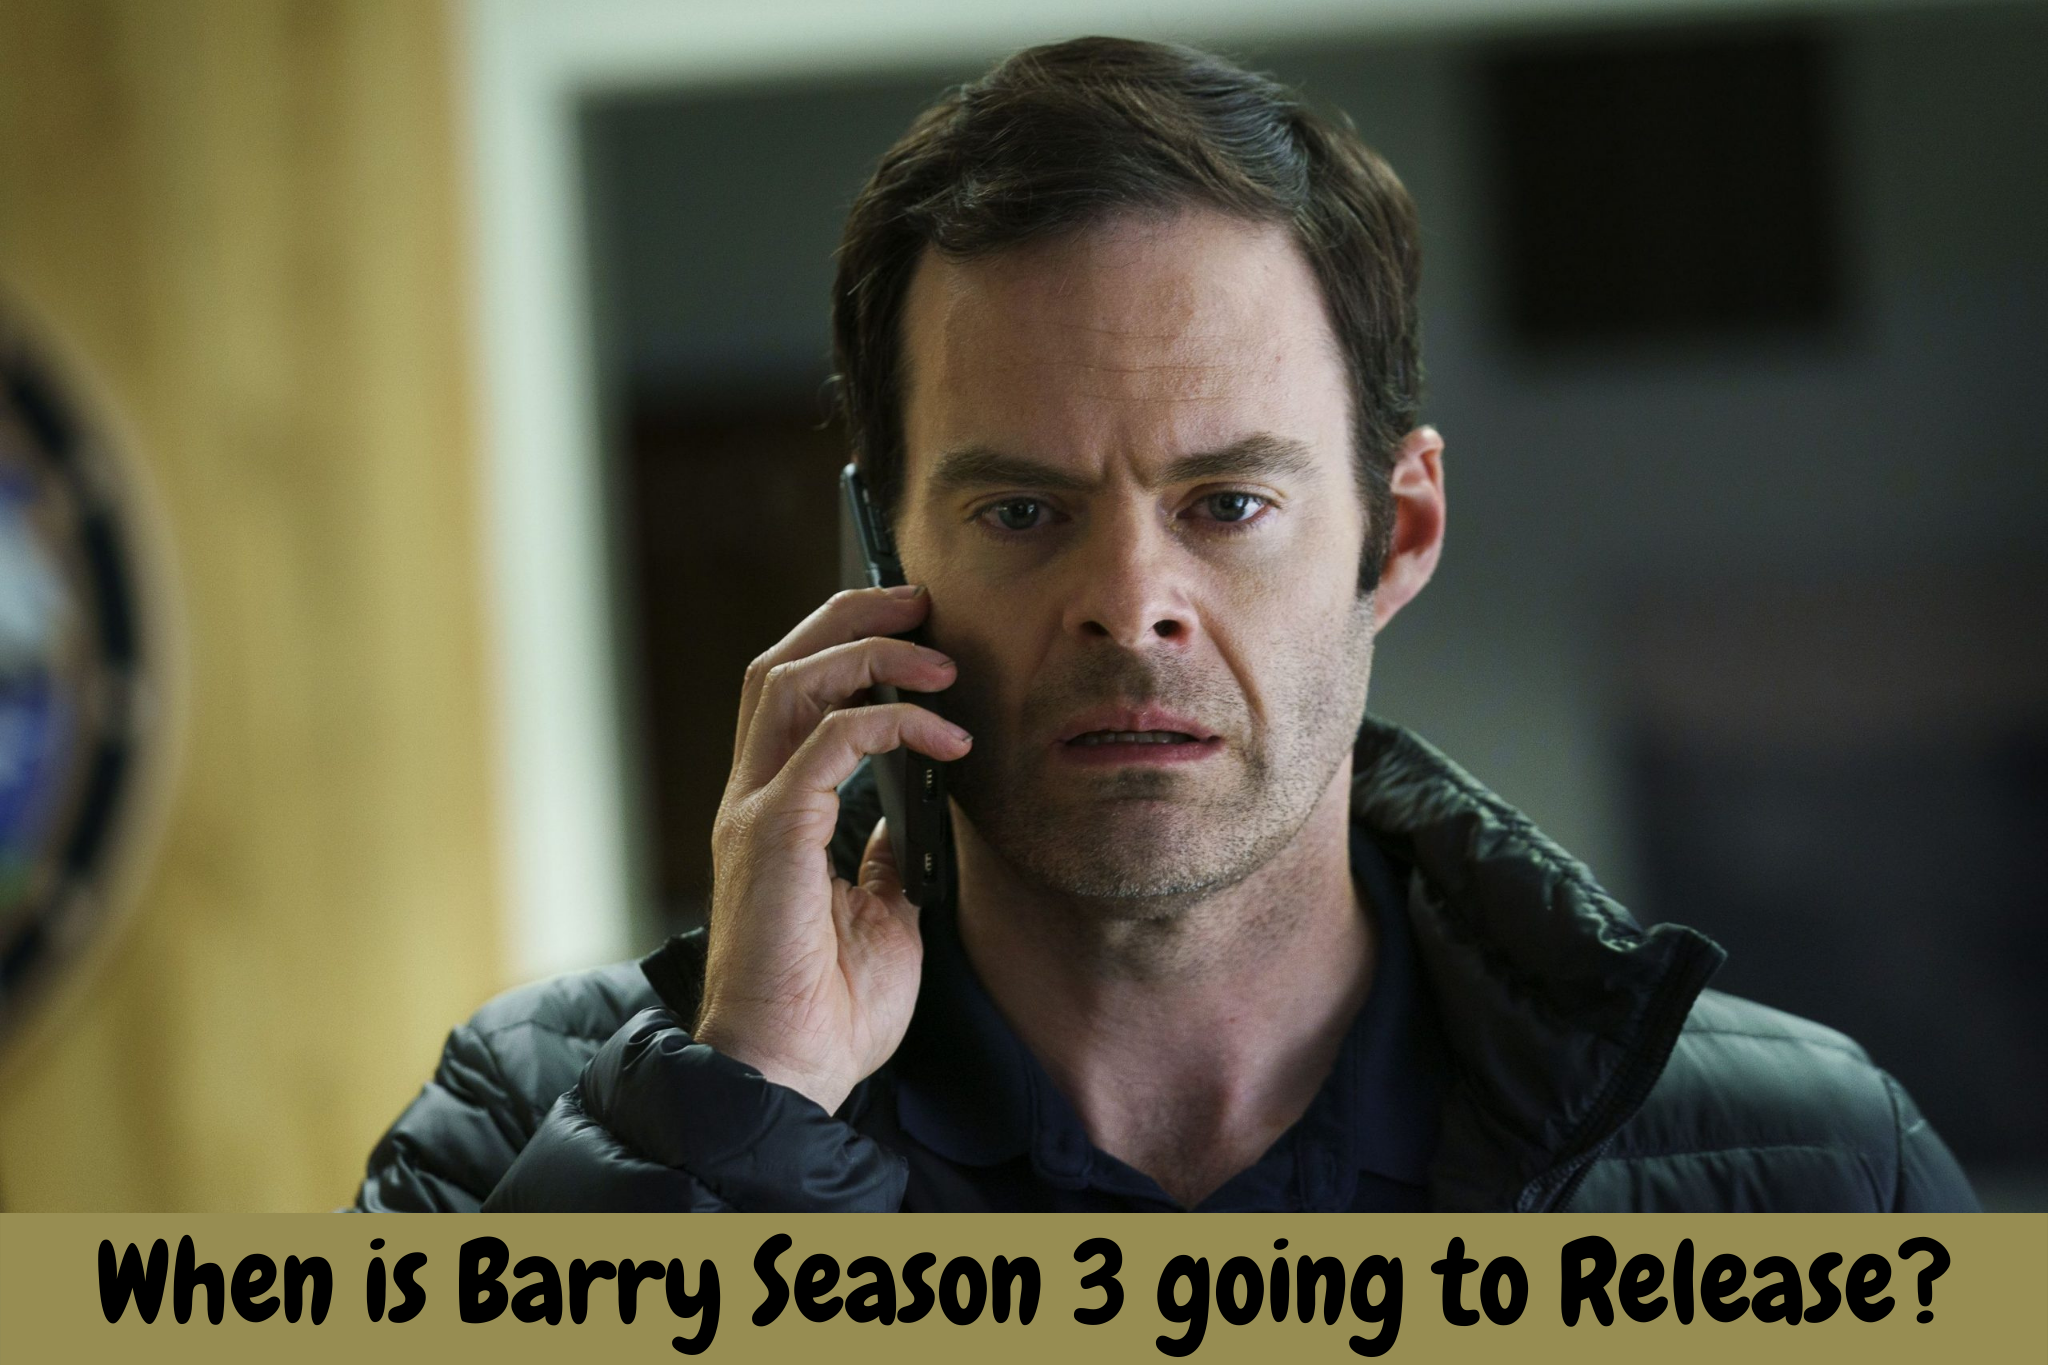 When is Barry Season 3 going to Release?